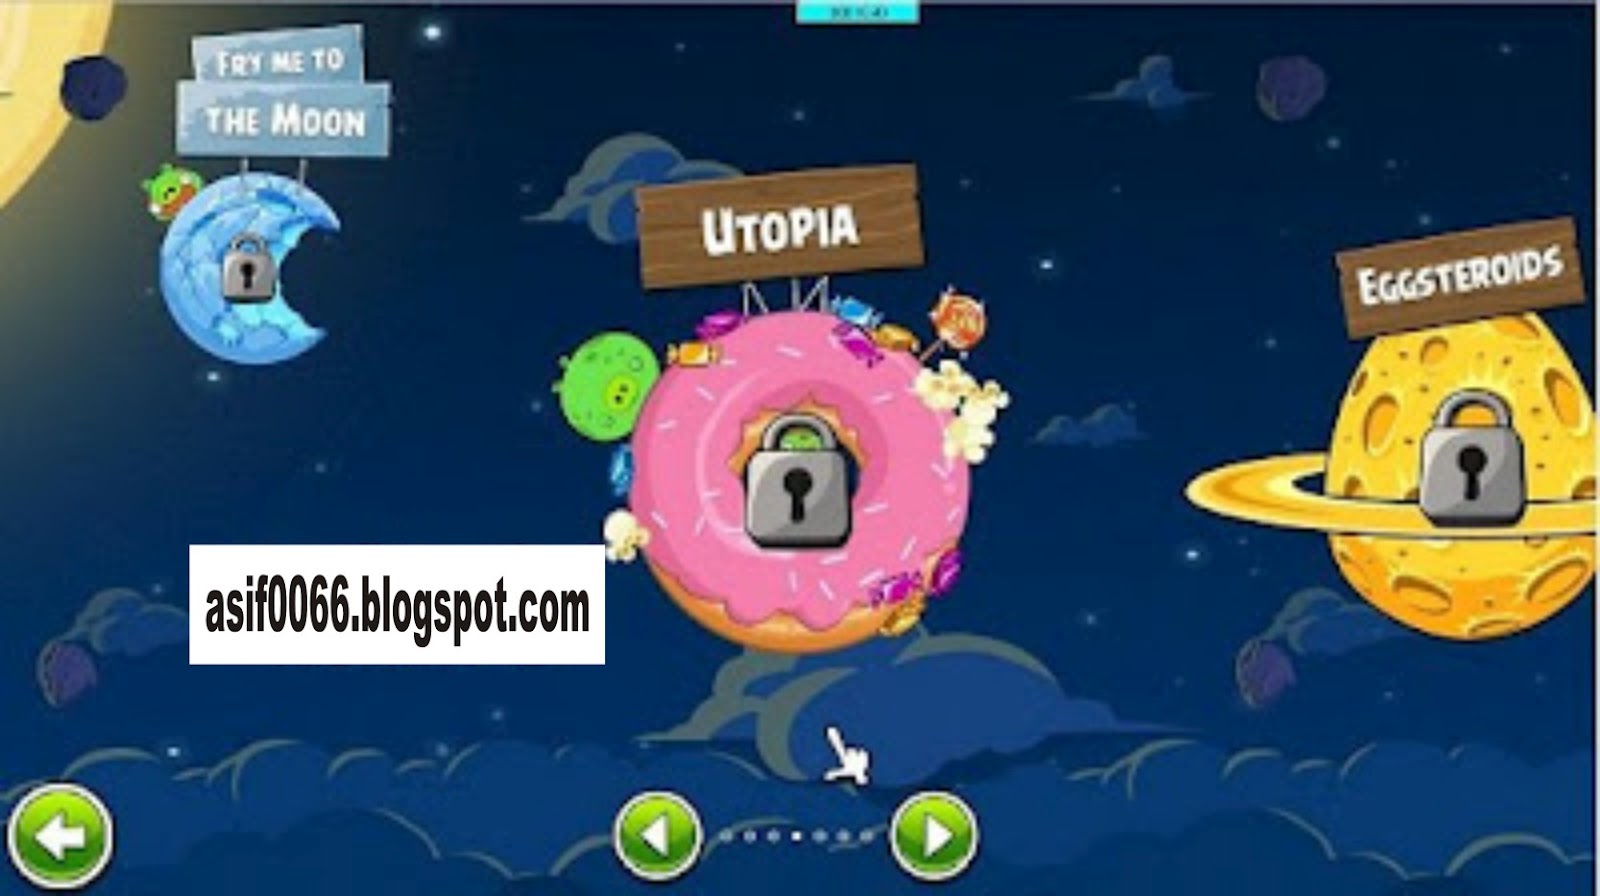 Apr 10, 2012. This Torrent contains:. Angry Birds Space Installer. Patch (to obtain full version).  Key.txt (to activate the game) NOTE: Patch is not "A VIRUS".